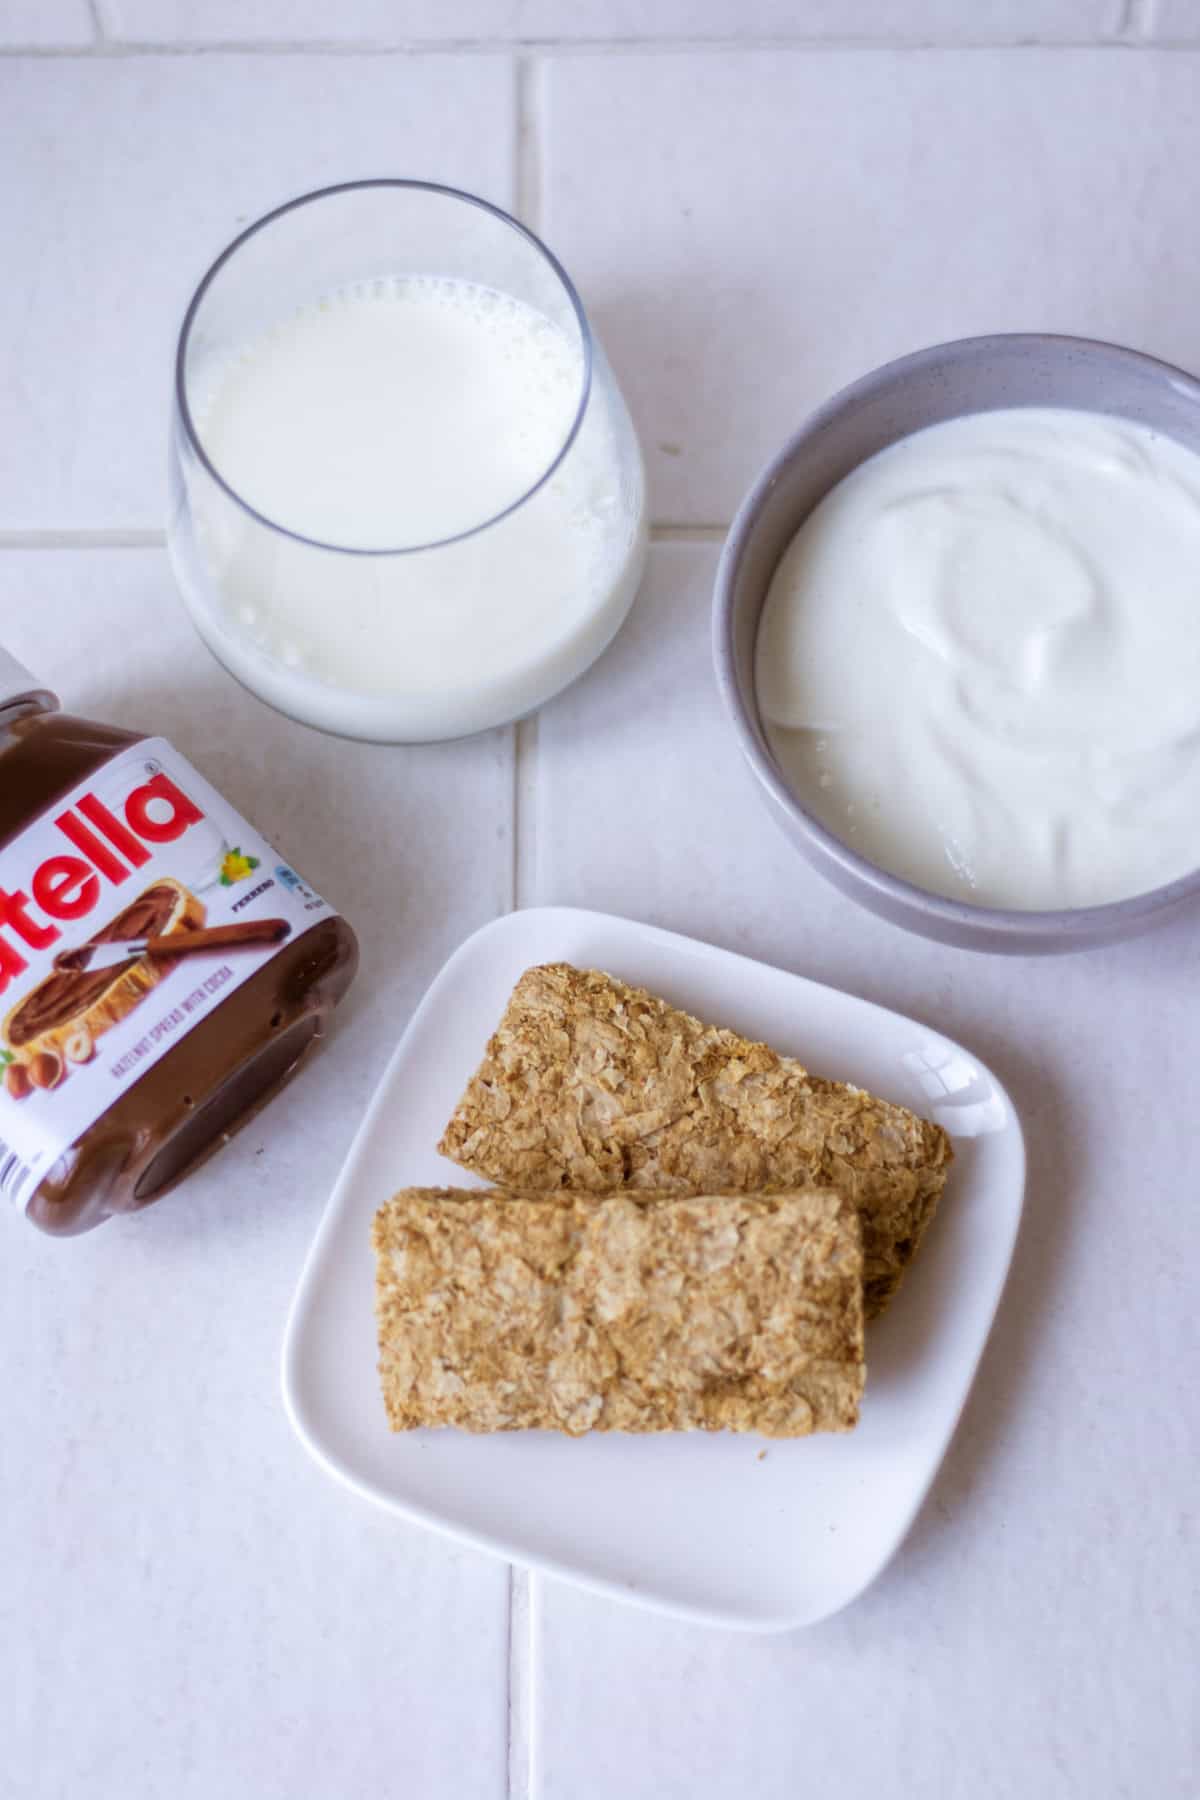 Overhead shot of ingredients to make Nutella overnight Weetabix, going clockwise from the top centre: milk, greek yoghurt, weetabix/weetbix, Nutella.